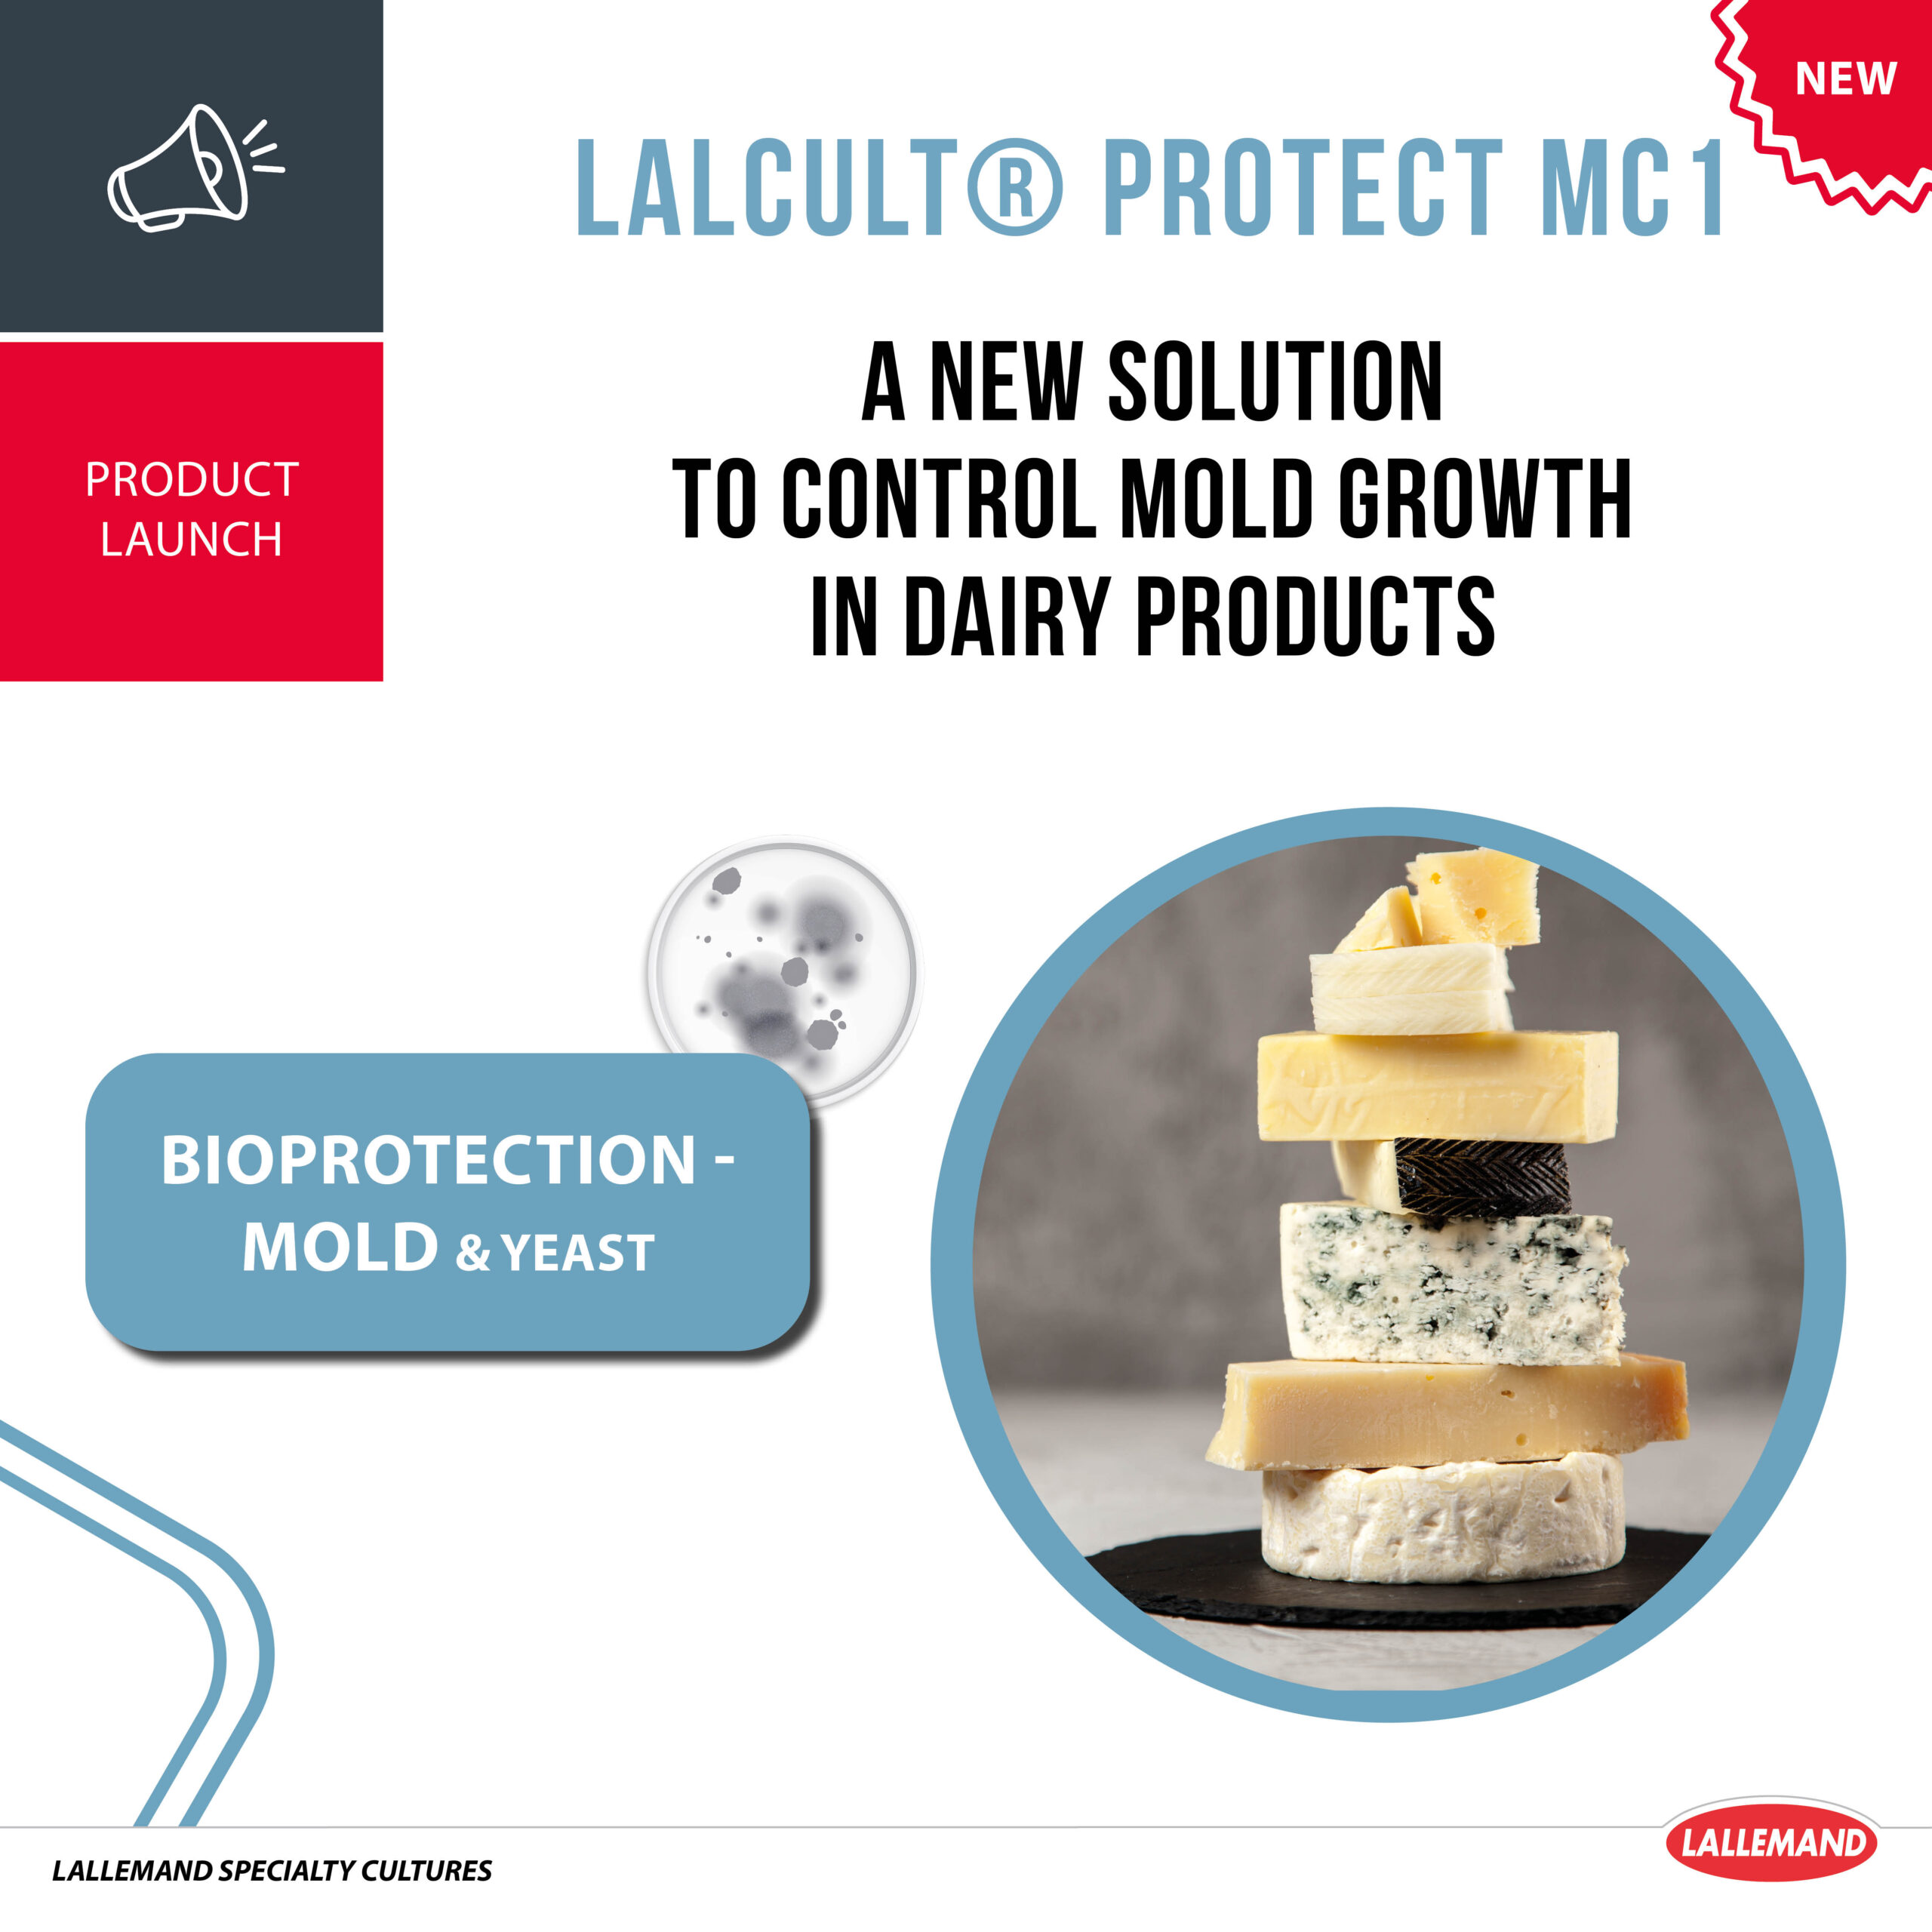 A new bioprotective solution to control mold in dairy products